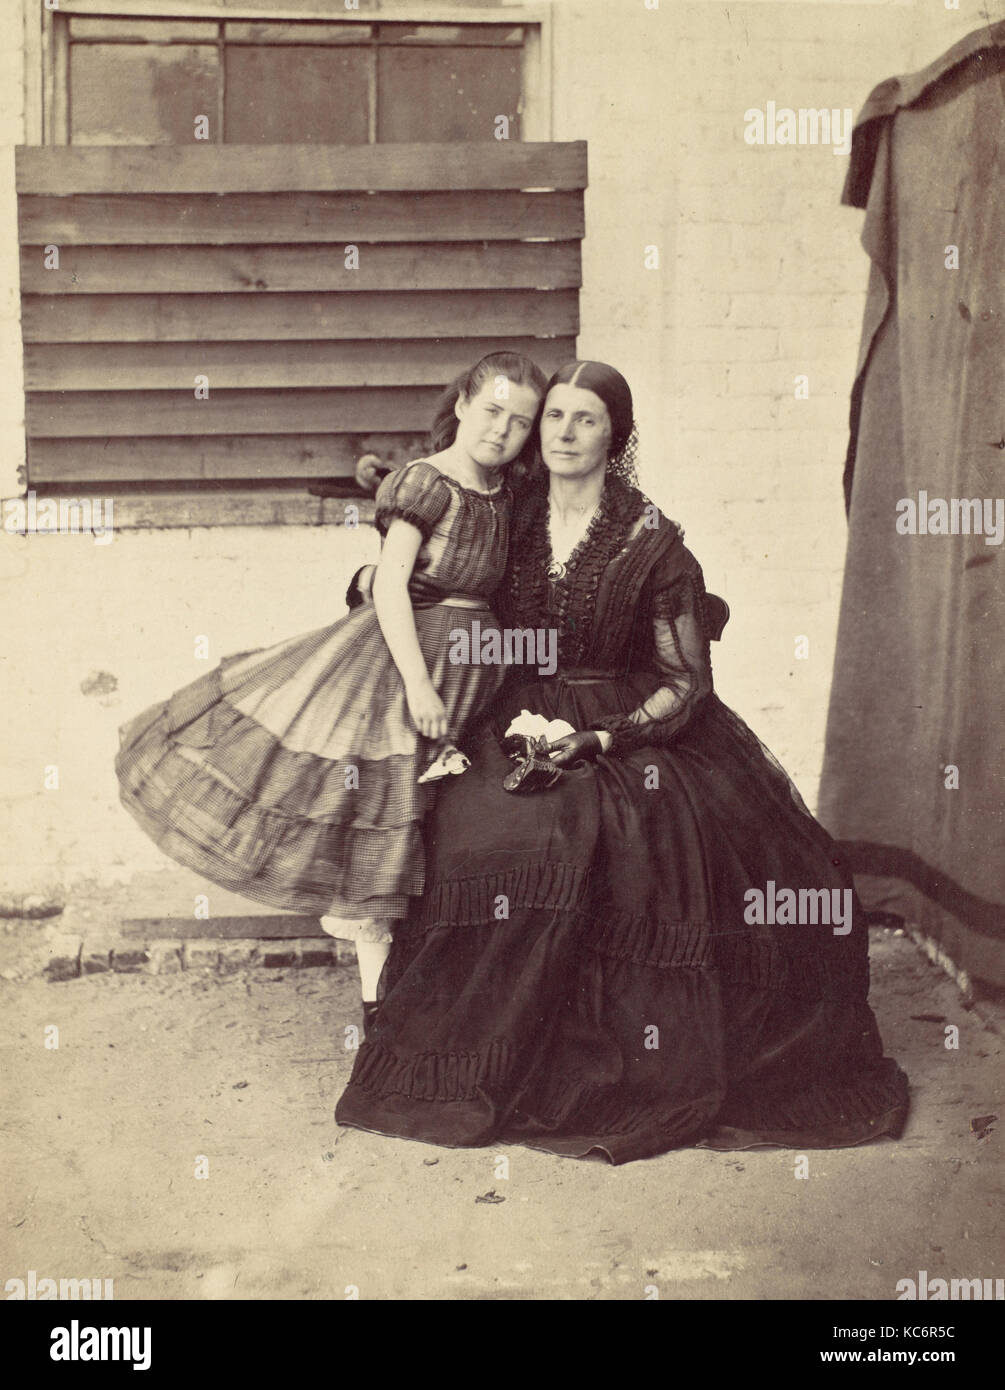 Mrs. Greenhow and Daughter, Imprisoned in the Old Capitol, Washington, Alexander Gardner, 1862 Stock Photo